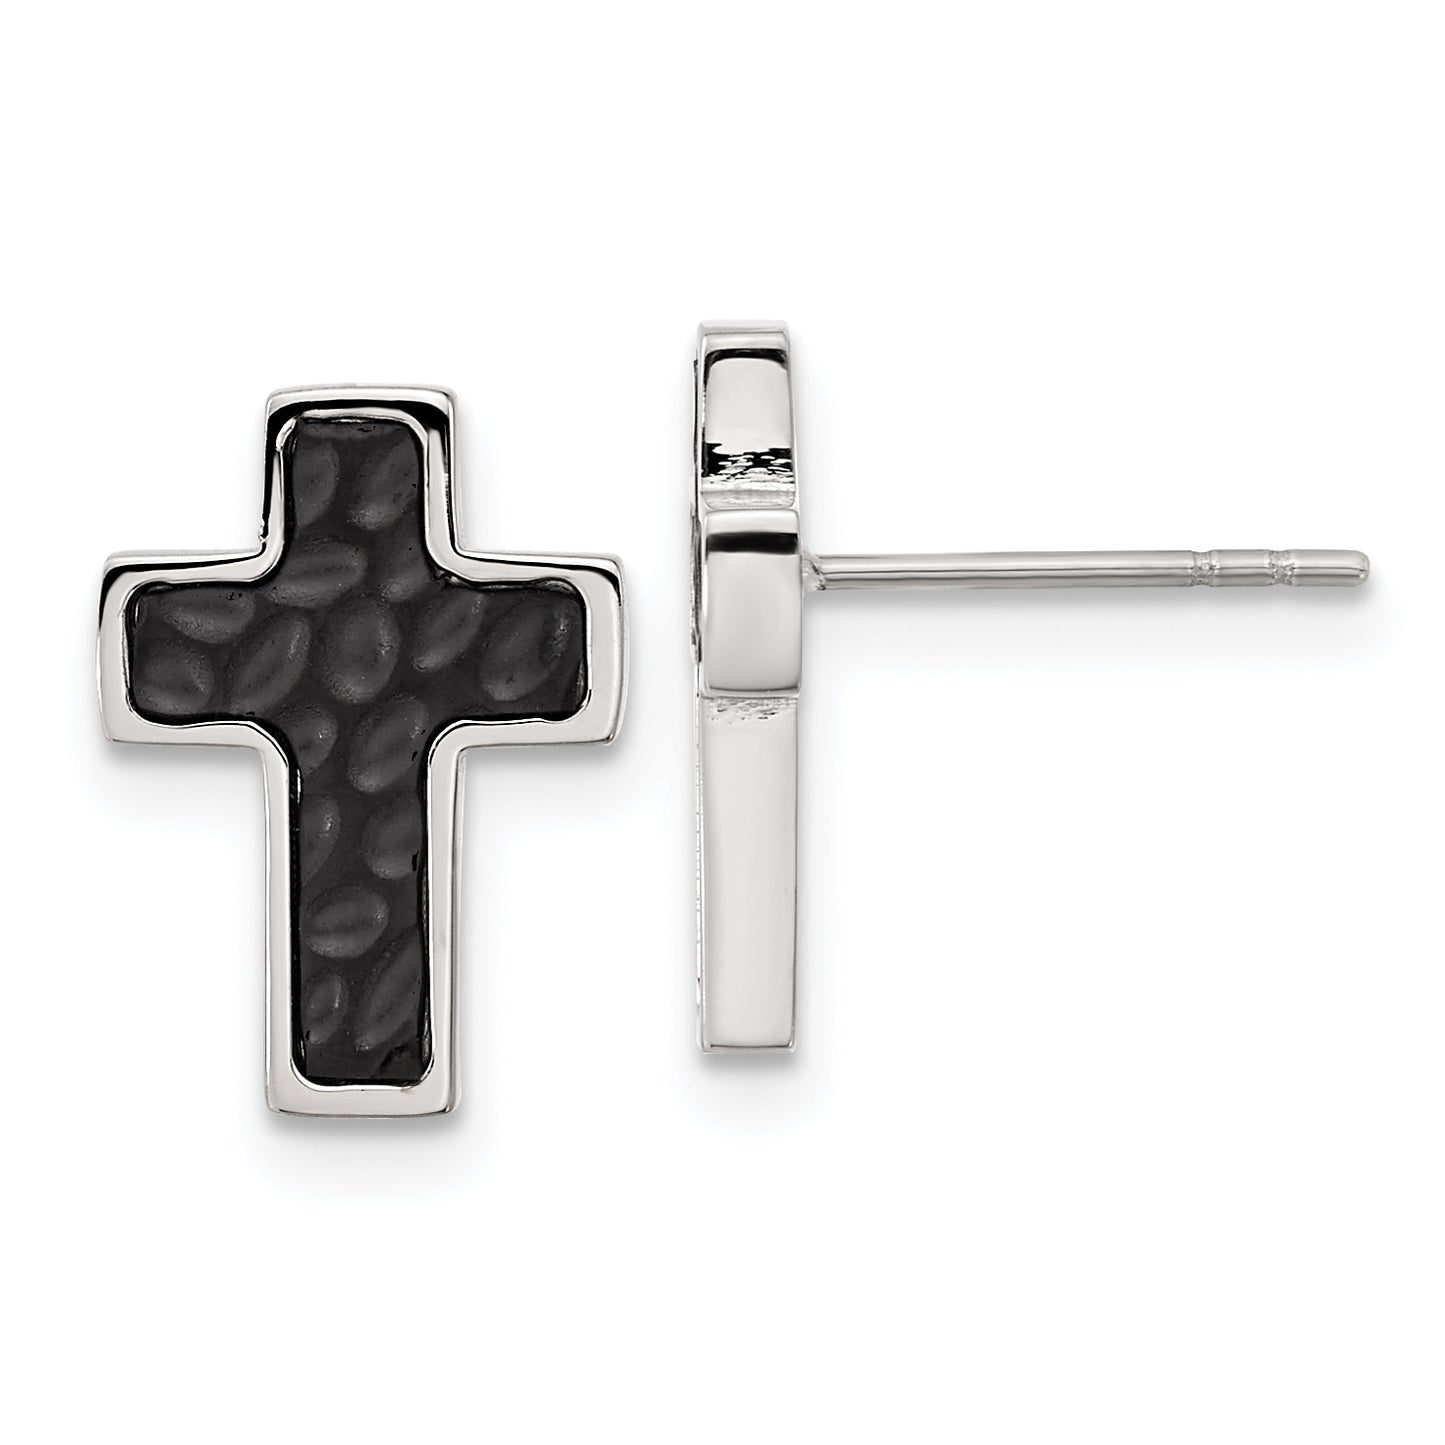 Chisel Stainless Steel Brushed Polished and Textured Black IP-plated Cross Post Earrings